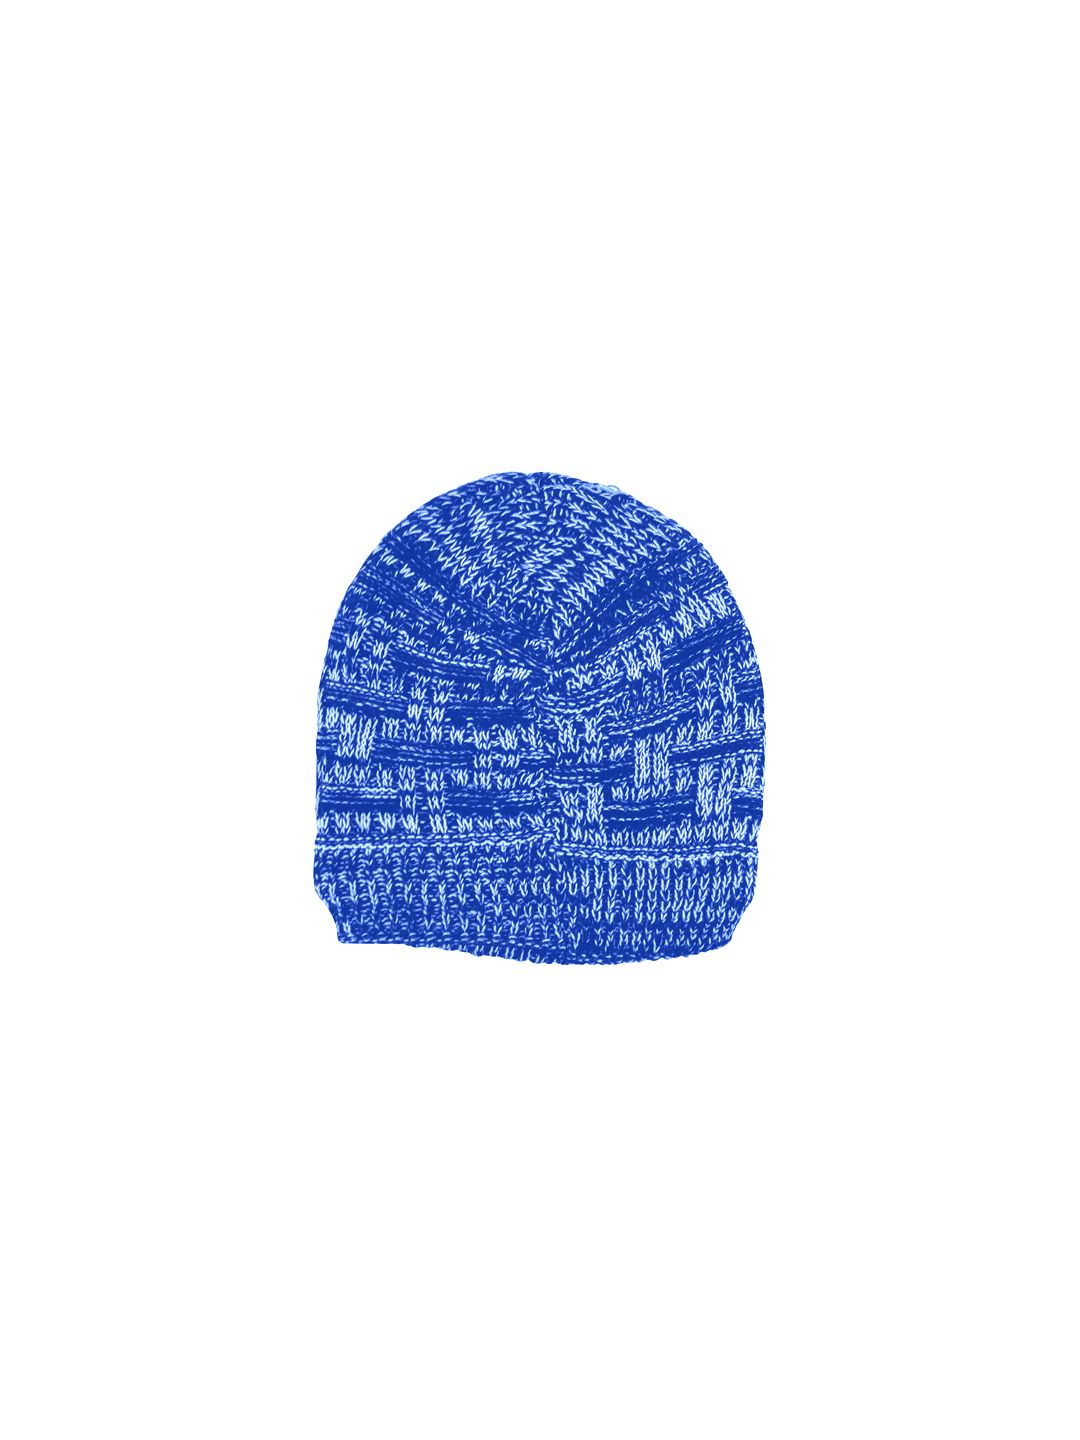 Knotyy Blue Unisex Beanie Price in India